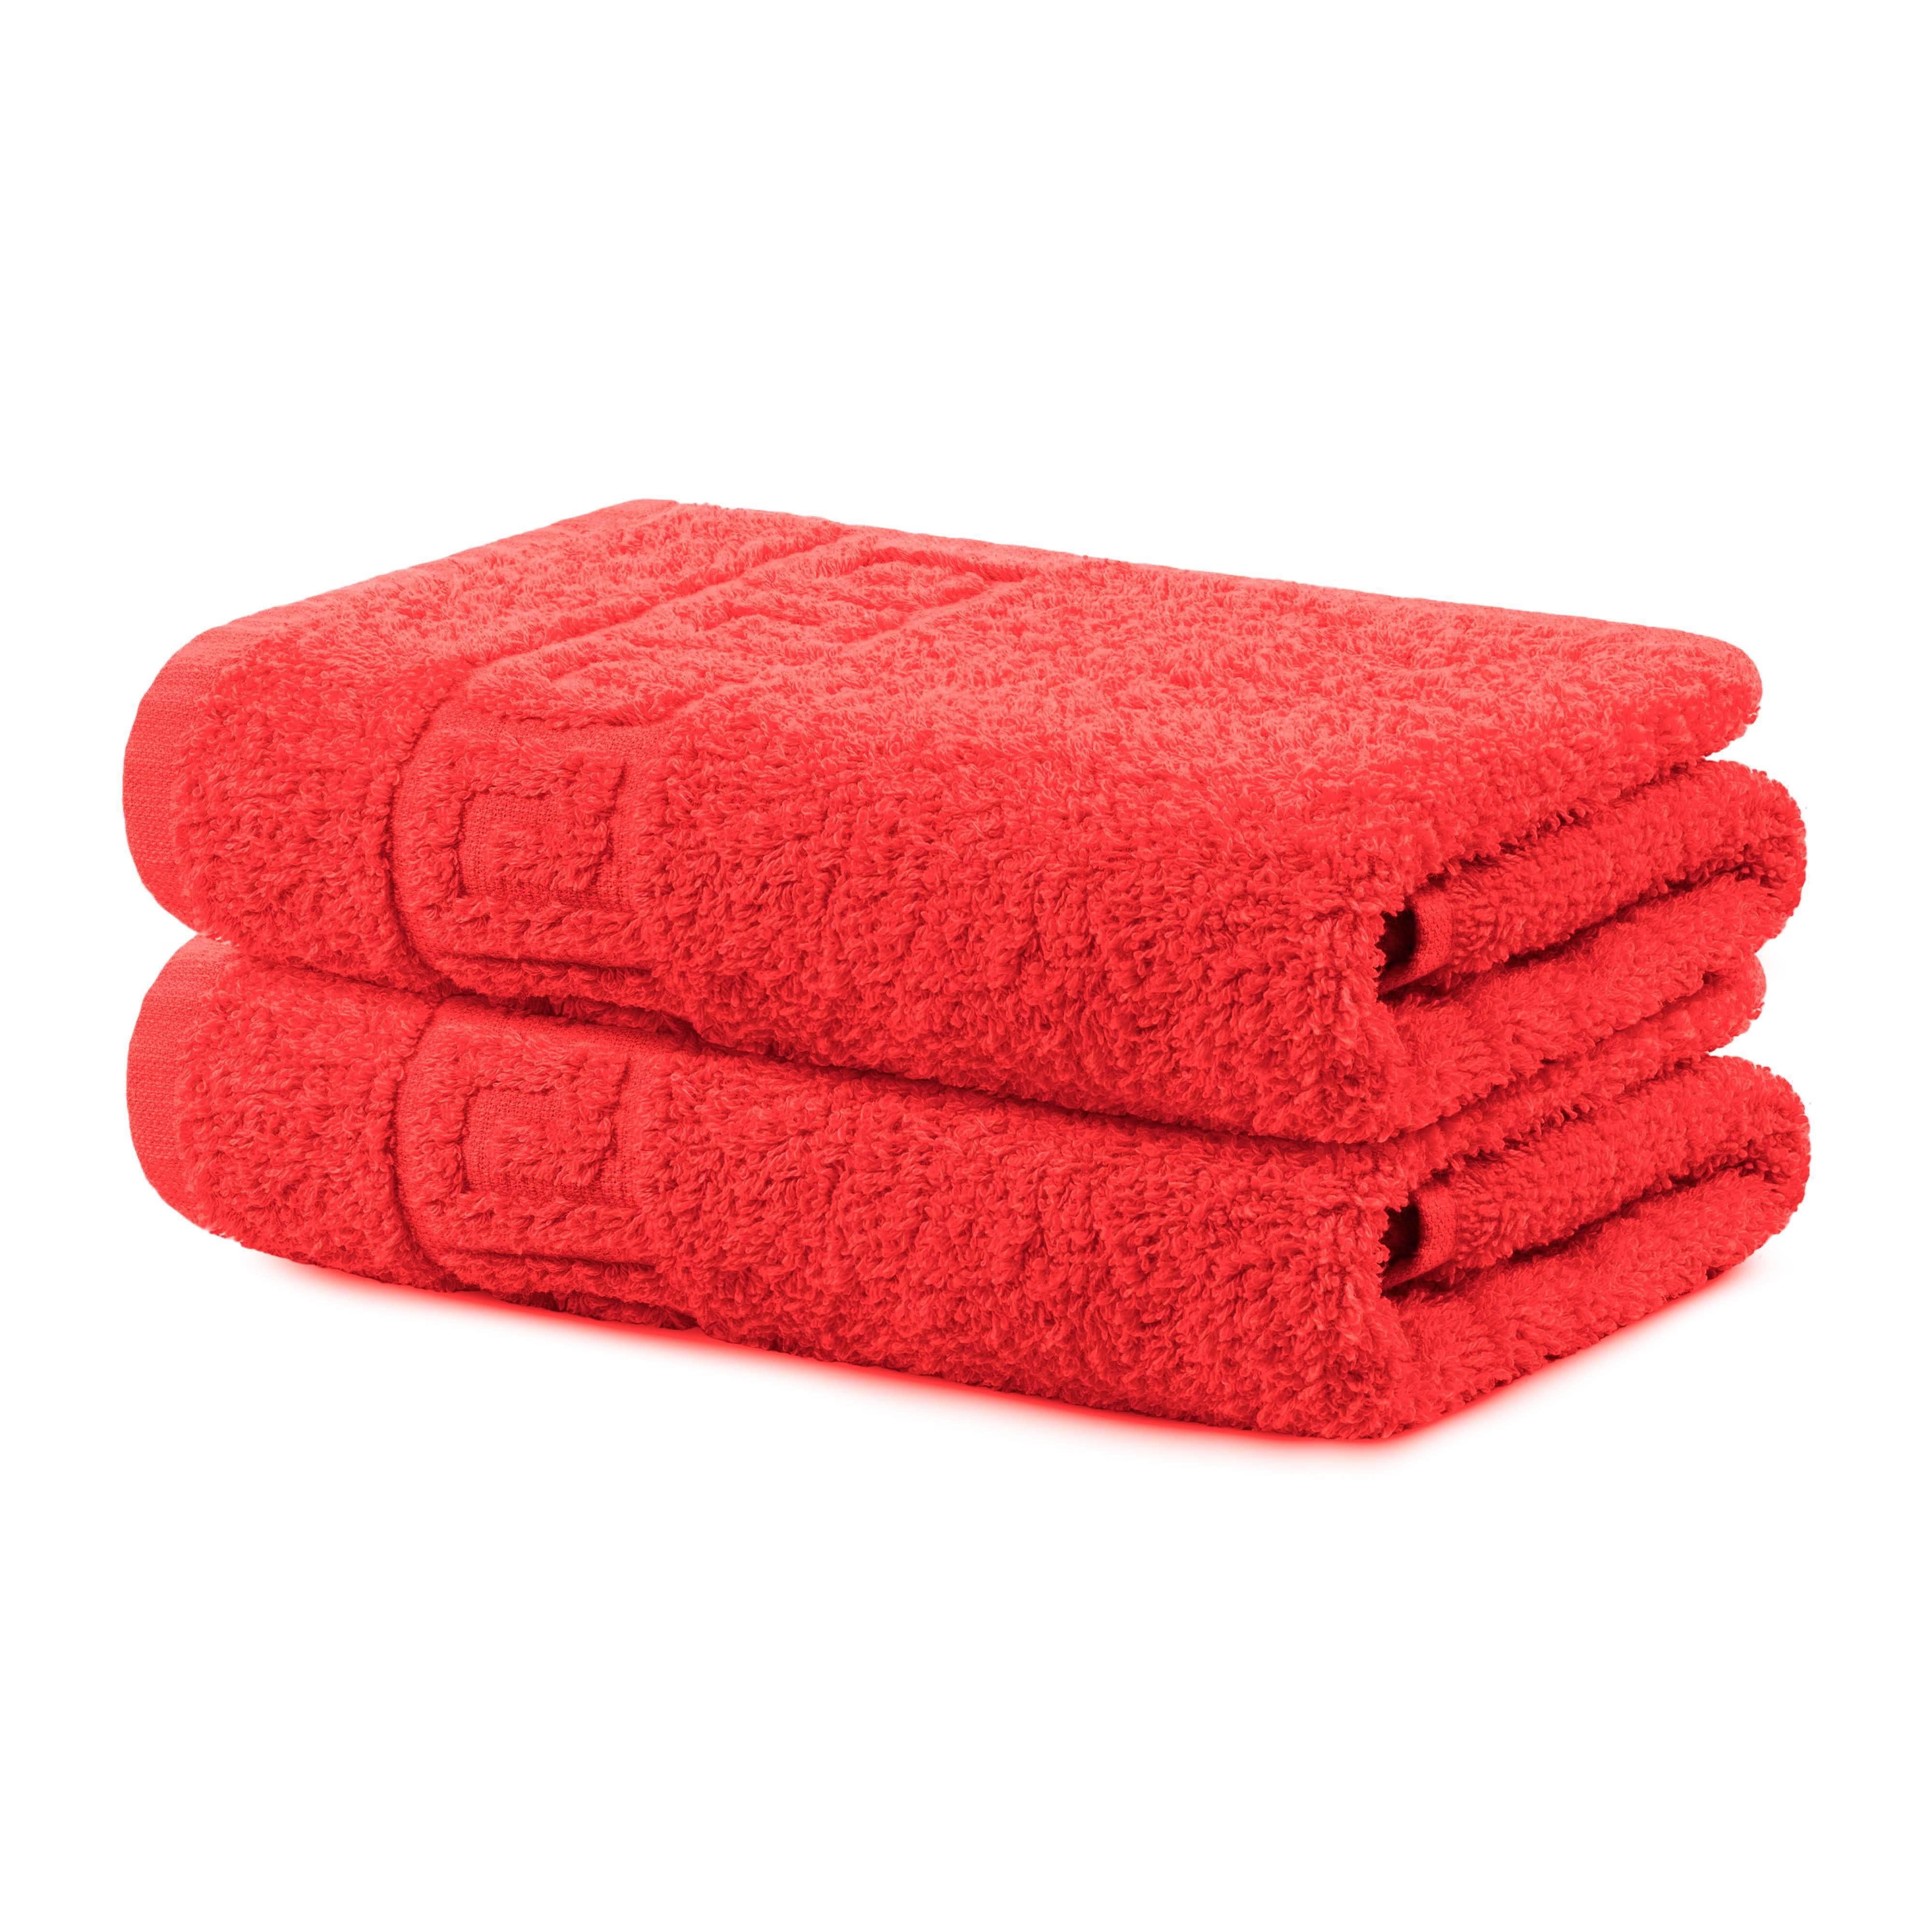 2 Piece 100% Cotton Hand/Bath Towel with Color Options - Context USA - Towel by Context